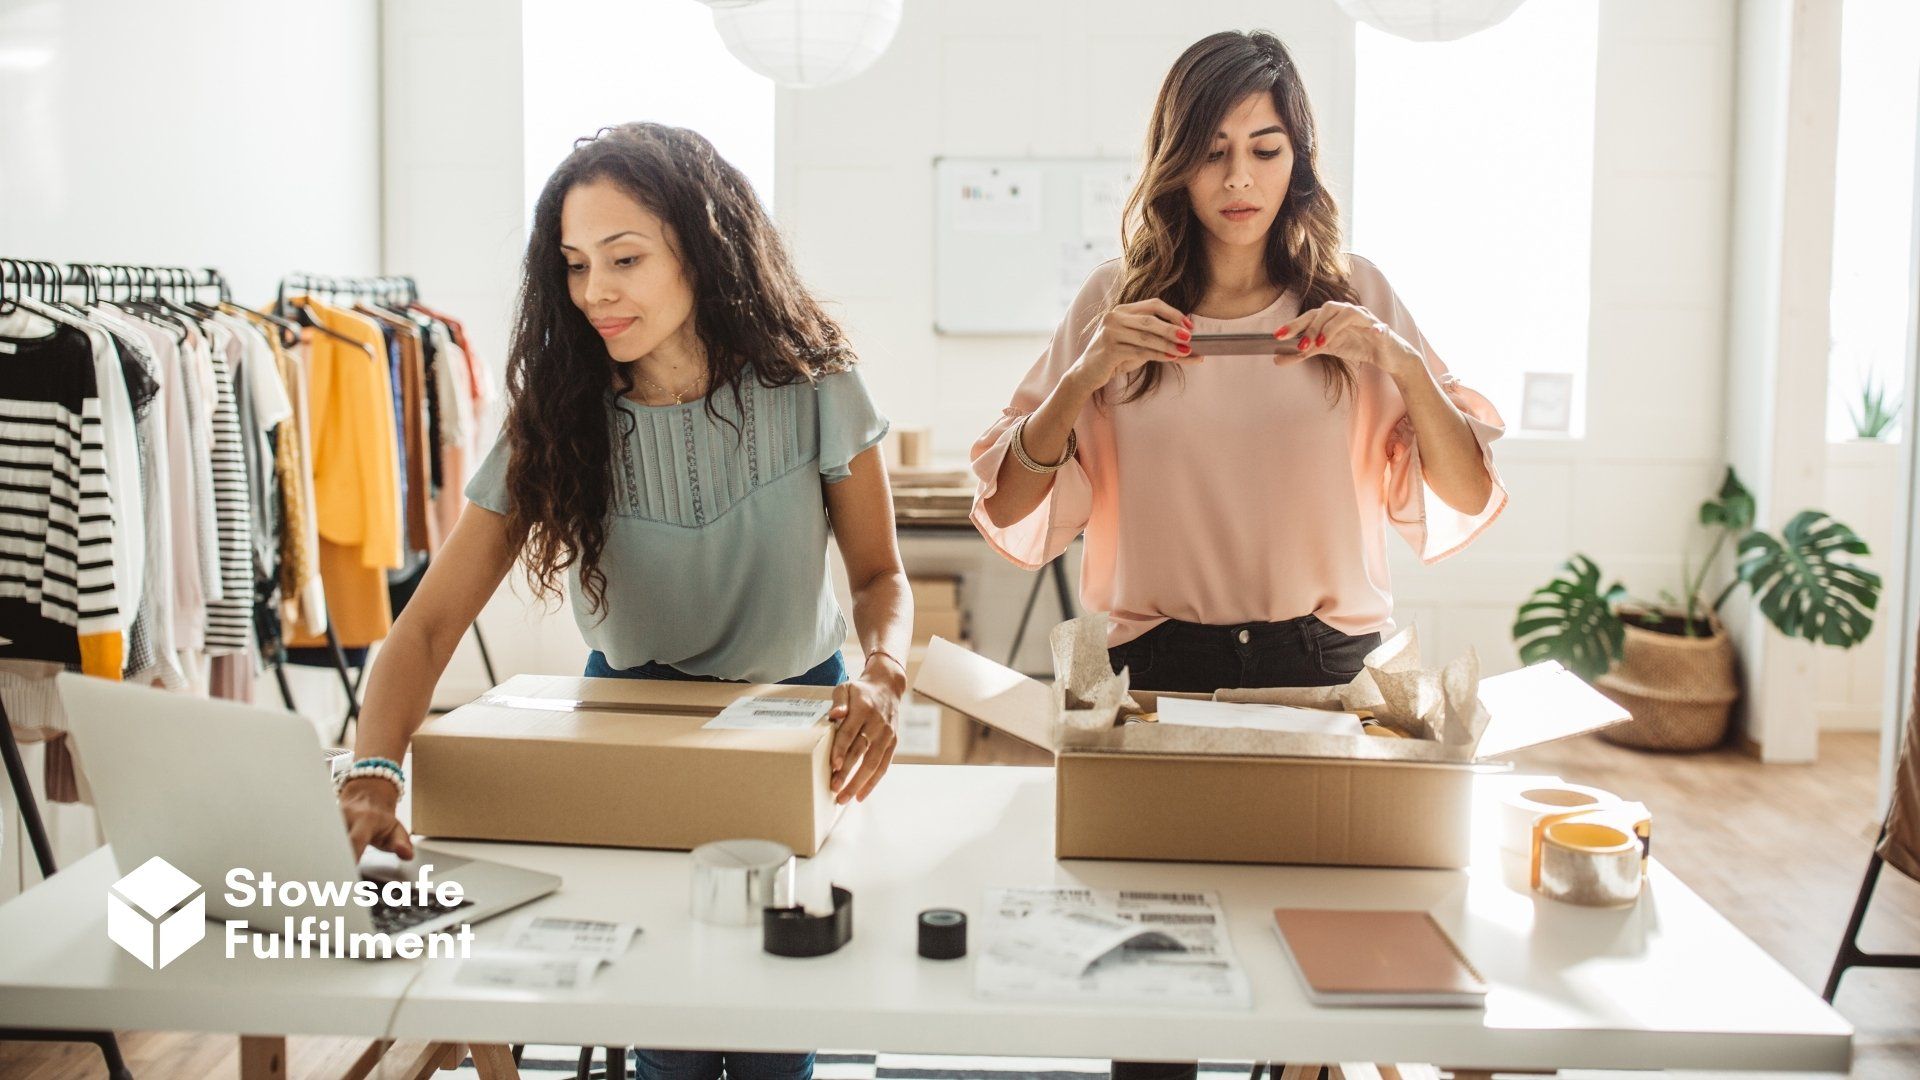 If you run a small business, the idea of outsourcing your fulfilment may seem unrealistic. Learn how it could, in fact, help your business grow.